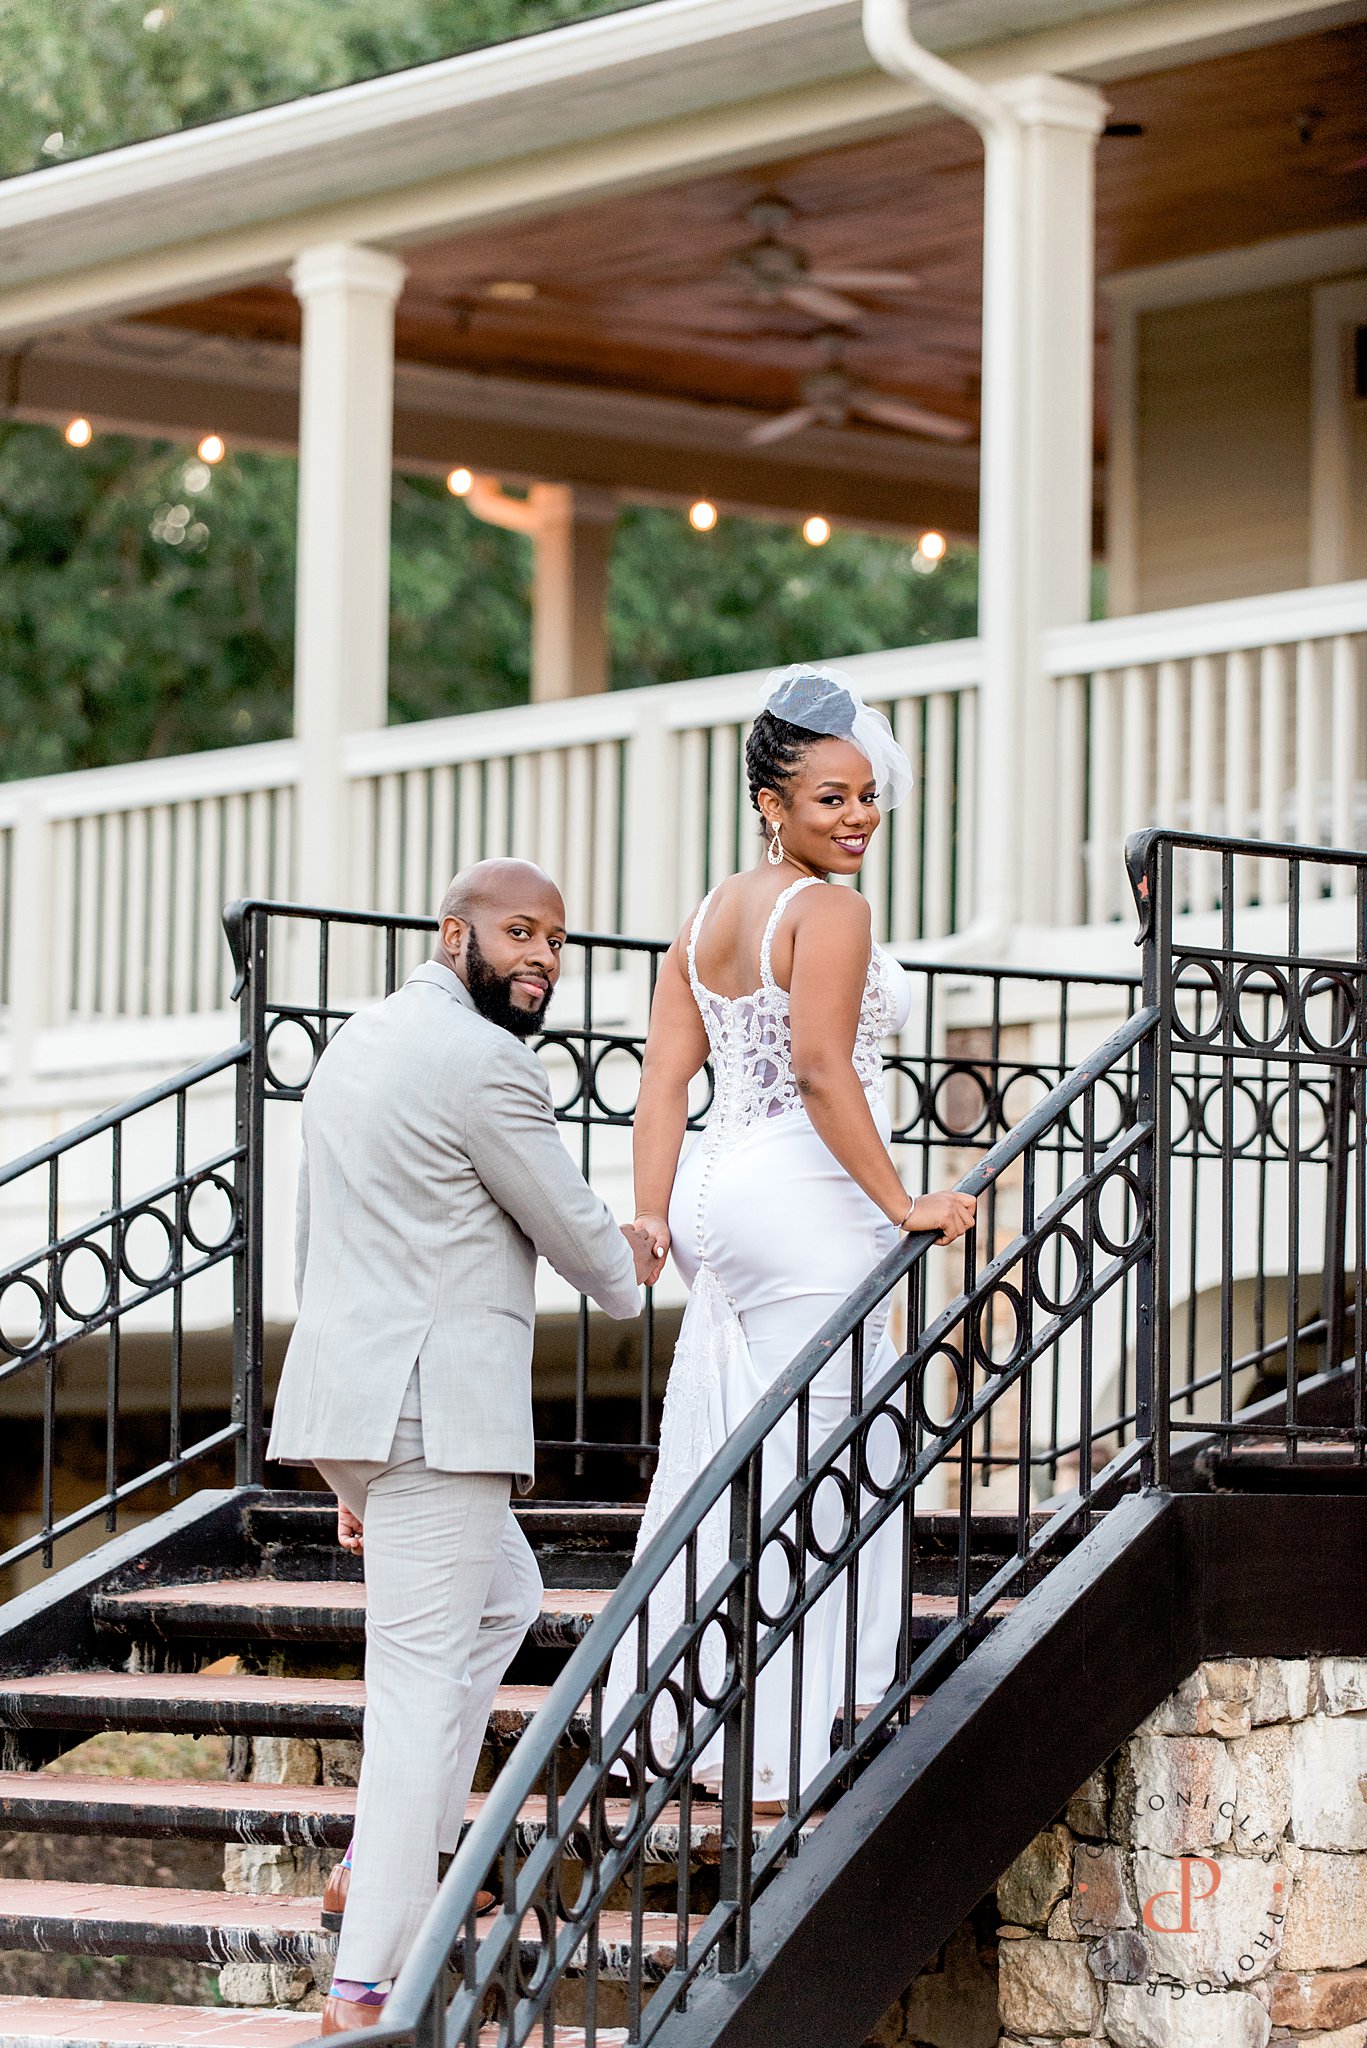 Treyburn Country Club Wedding, Elana Walker Events, Chronicles Photography, Natural Hair Bride, Raleigh NC Wedding Photographer, Durham Wedding Photographer, Wedding Photographer, Black Bride, Black Groom, Pink, Purple and Grey Wedding Theme, Bride and Groom Portrait